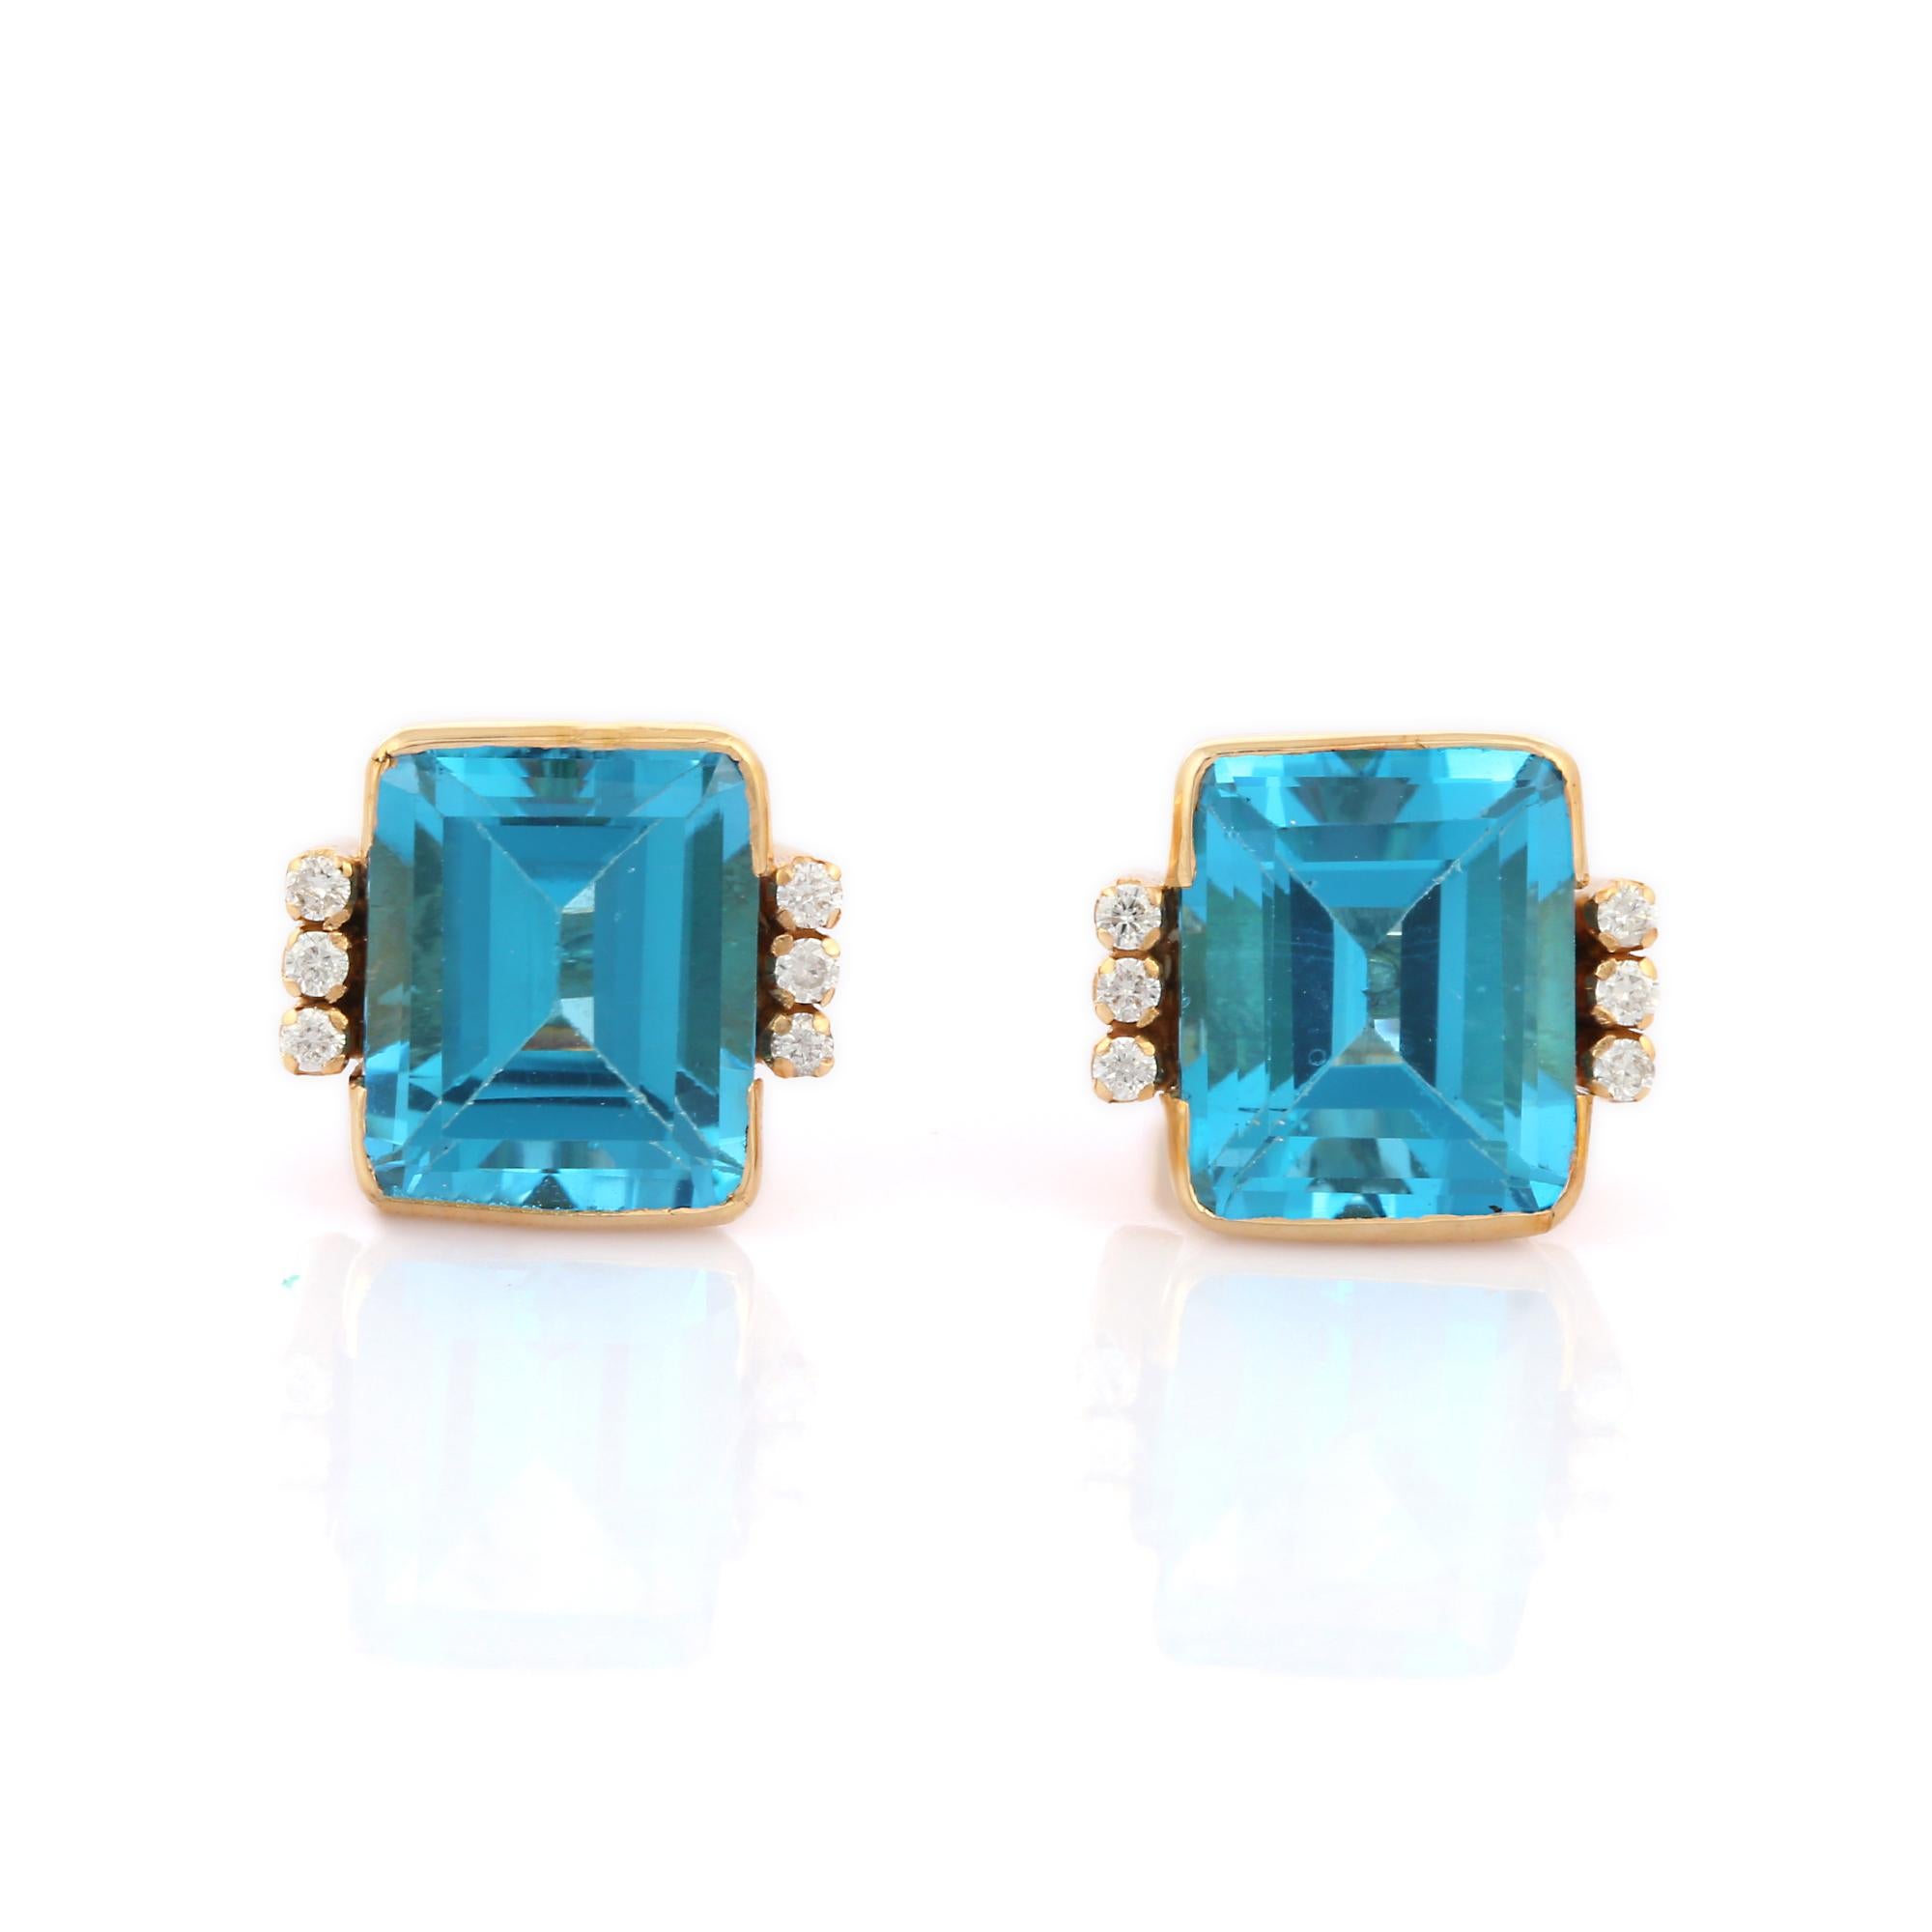 Genuine Blue Topaz 15.15 Ct Stud Earrings with Diamonds in 18K Yellow Gold In New Condition For Sale In Houston, TX